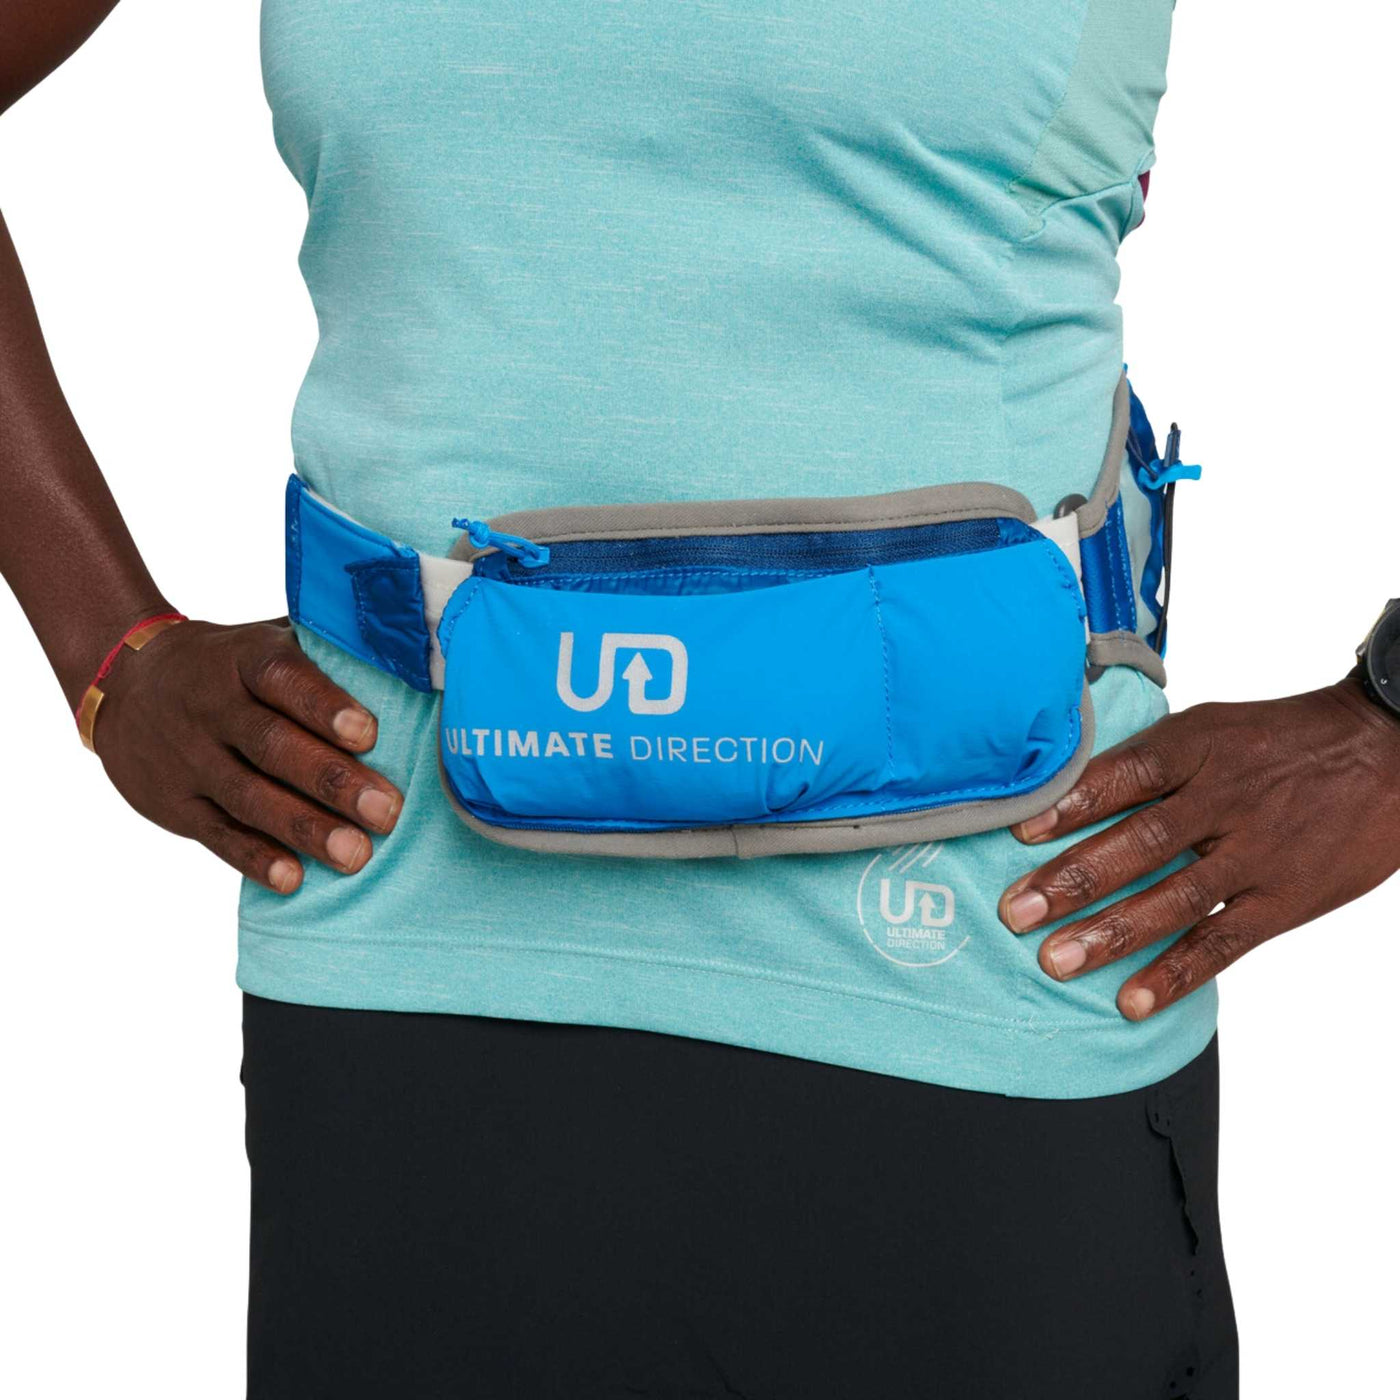 Ultimate Direction Adventure Pocket 6.0 | Trail Running Accessories NZ | Further Faster Christchurch NZ 